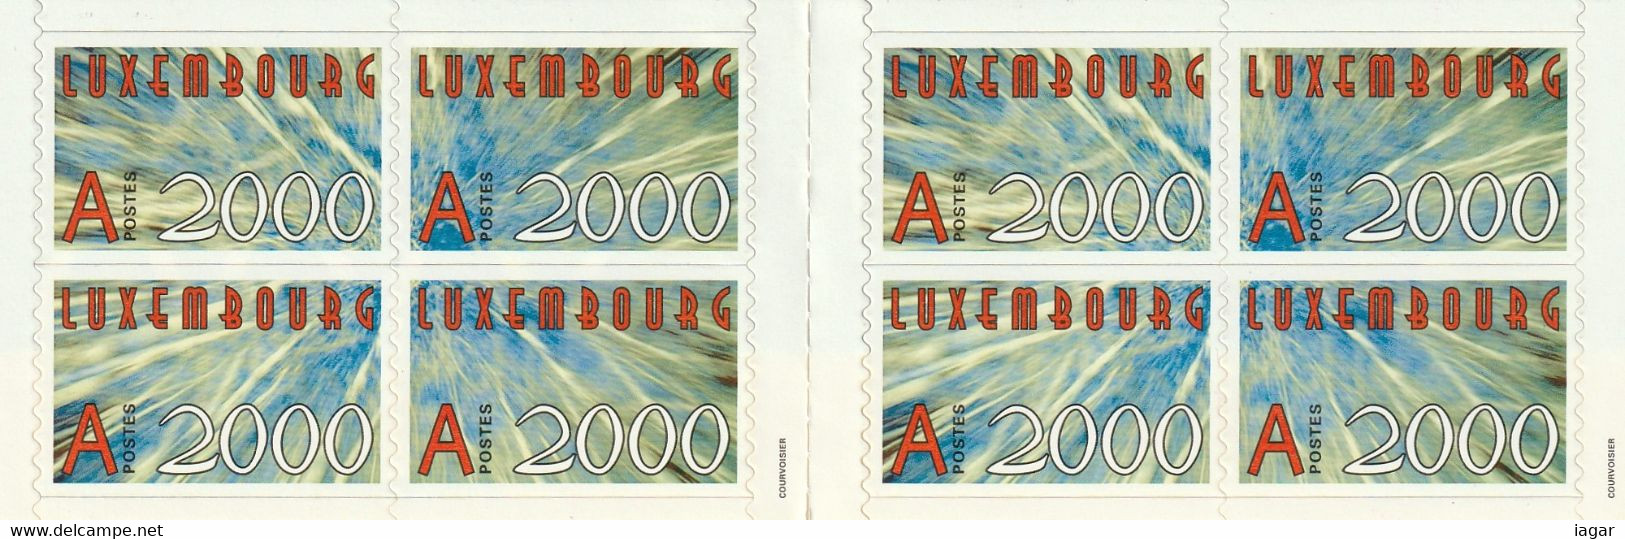 LUXEMBOURG 2000 - BOOKLET 2000 AND LETTER 'A' - Markenheftchen